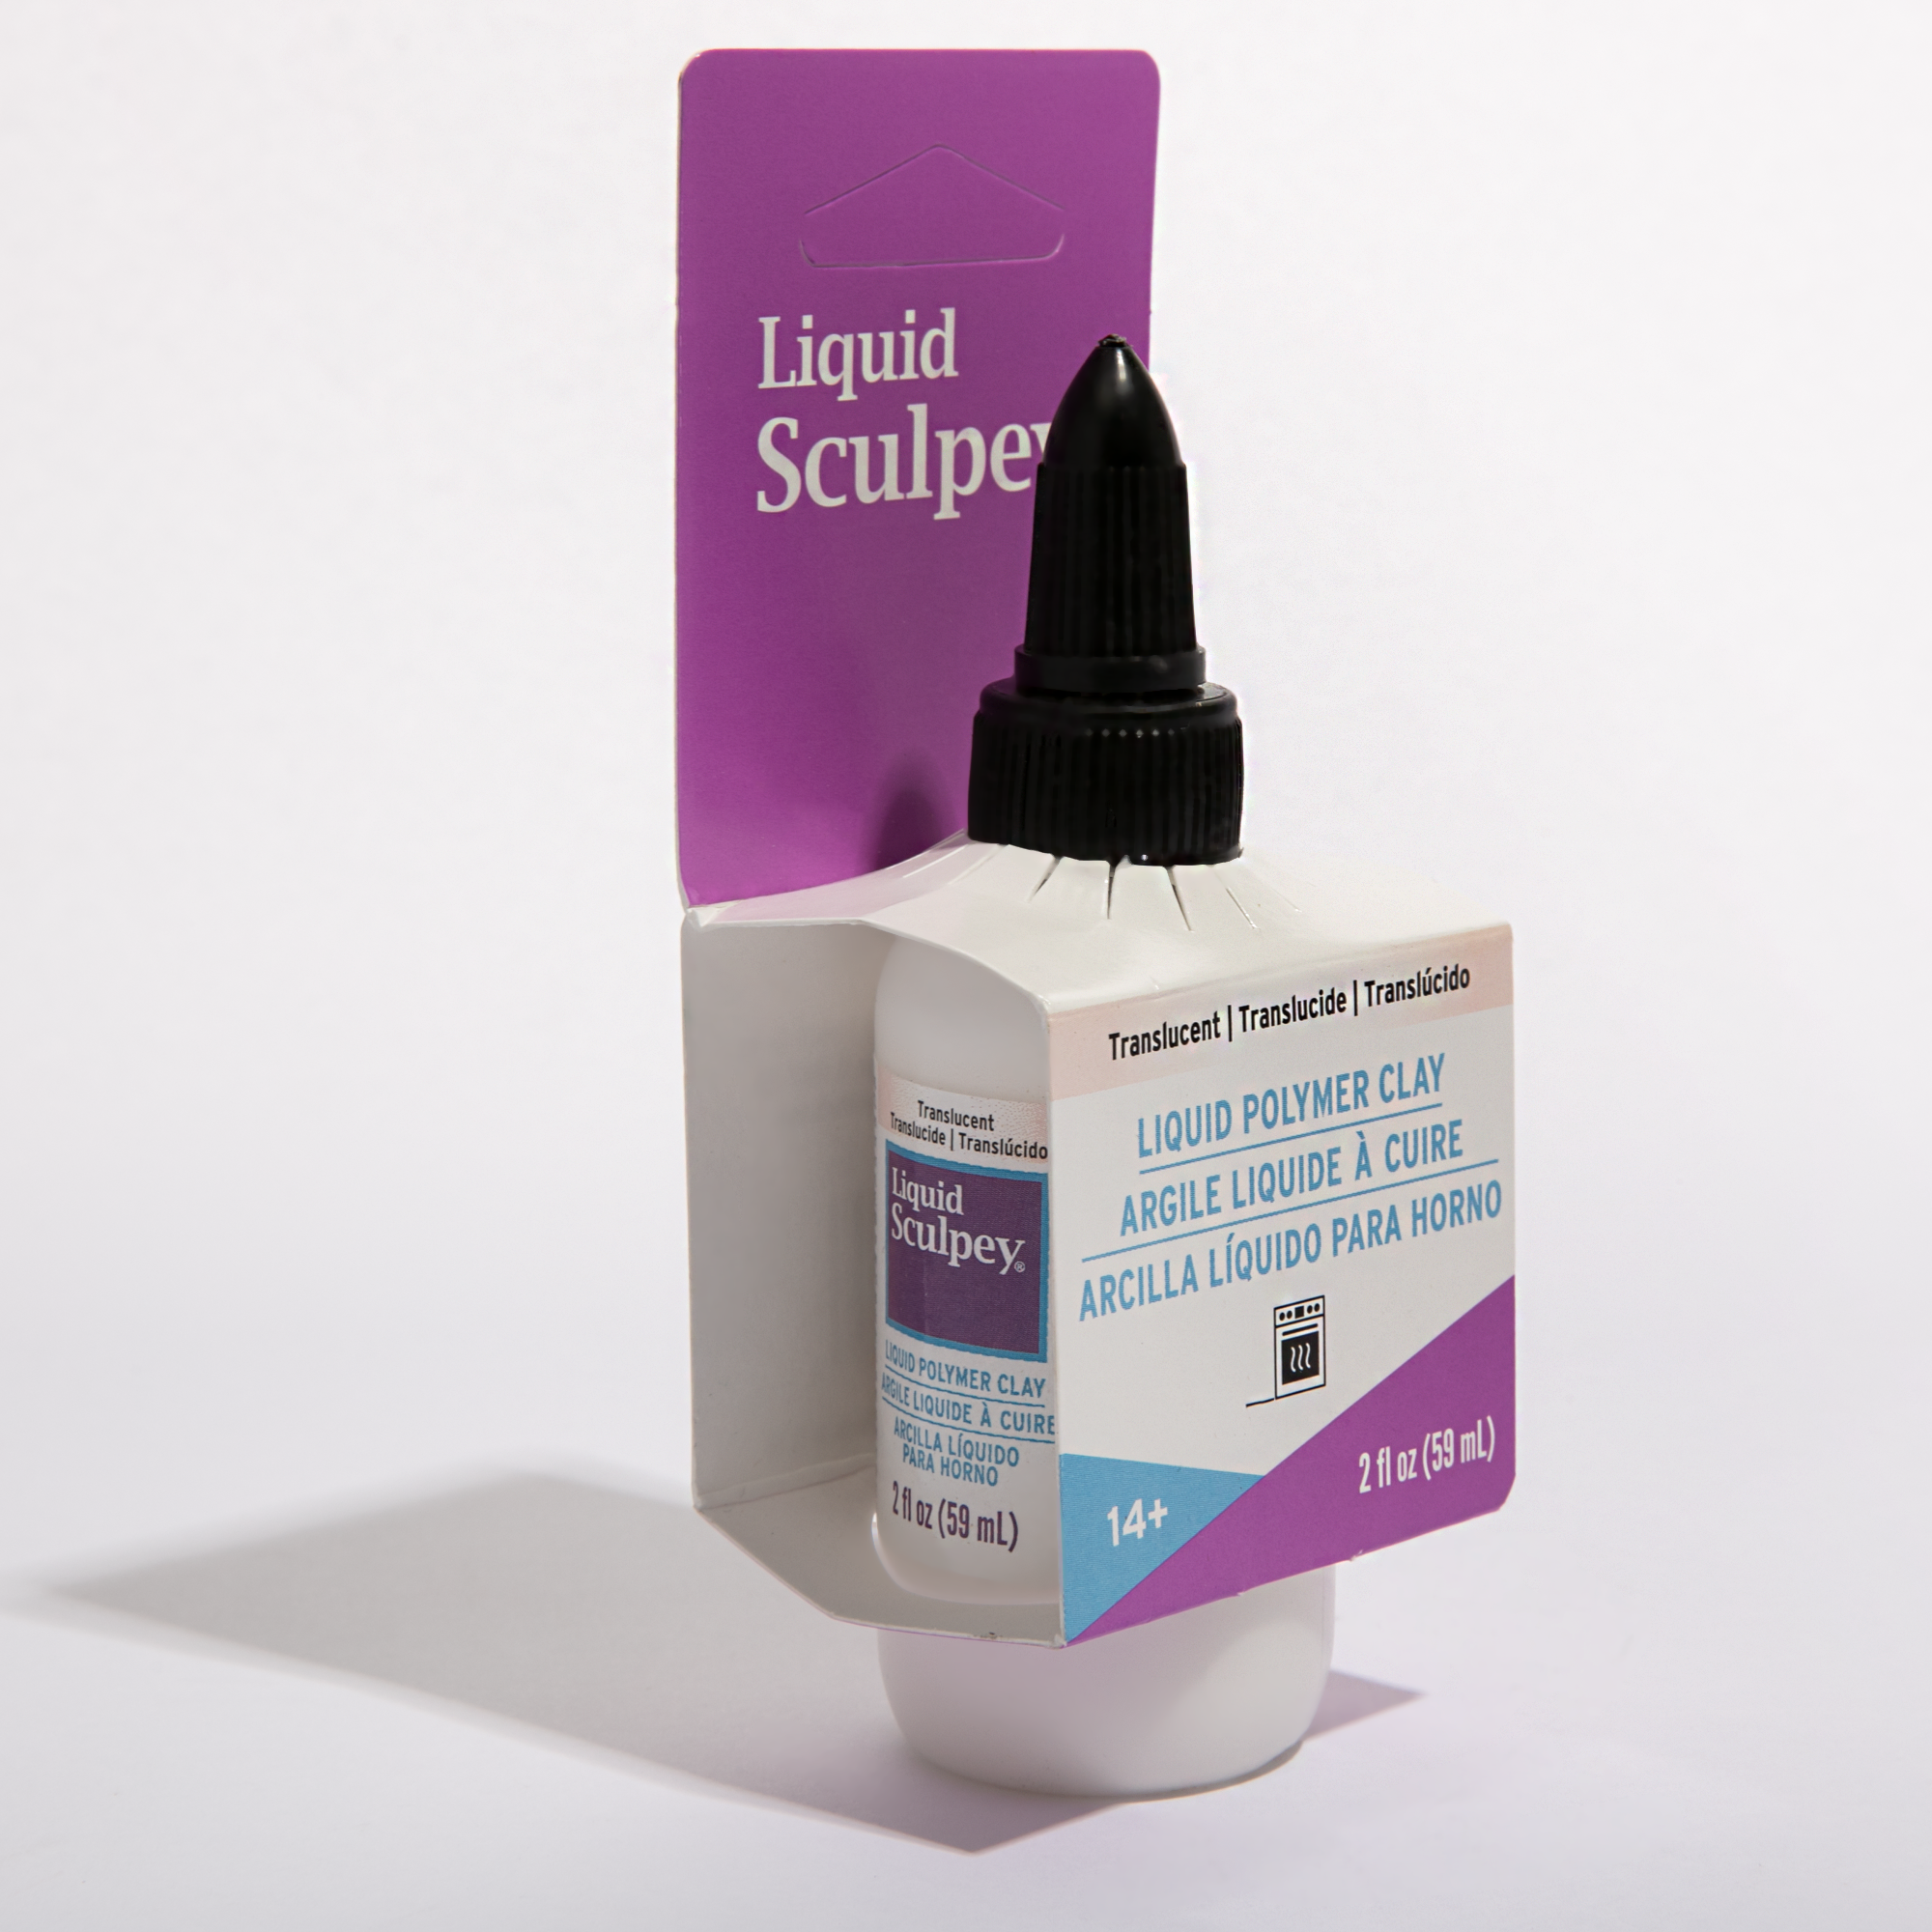 Improve Your Lifestyle : Liquid Sculpey Polymer Clay- Translucent